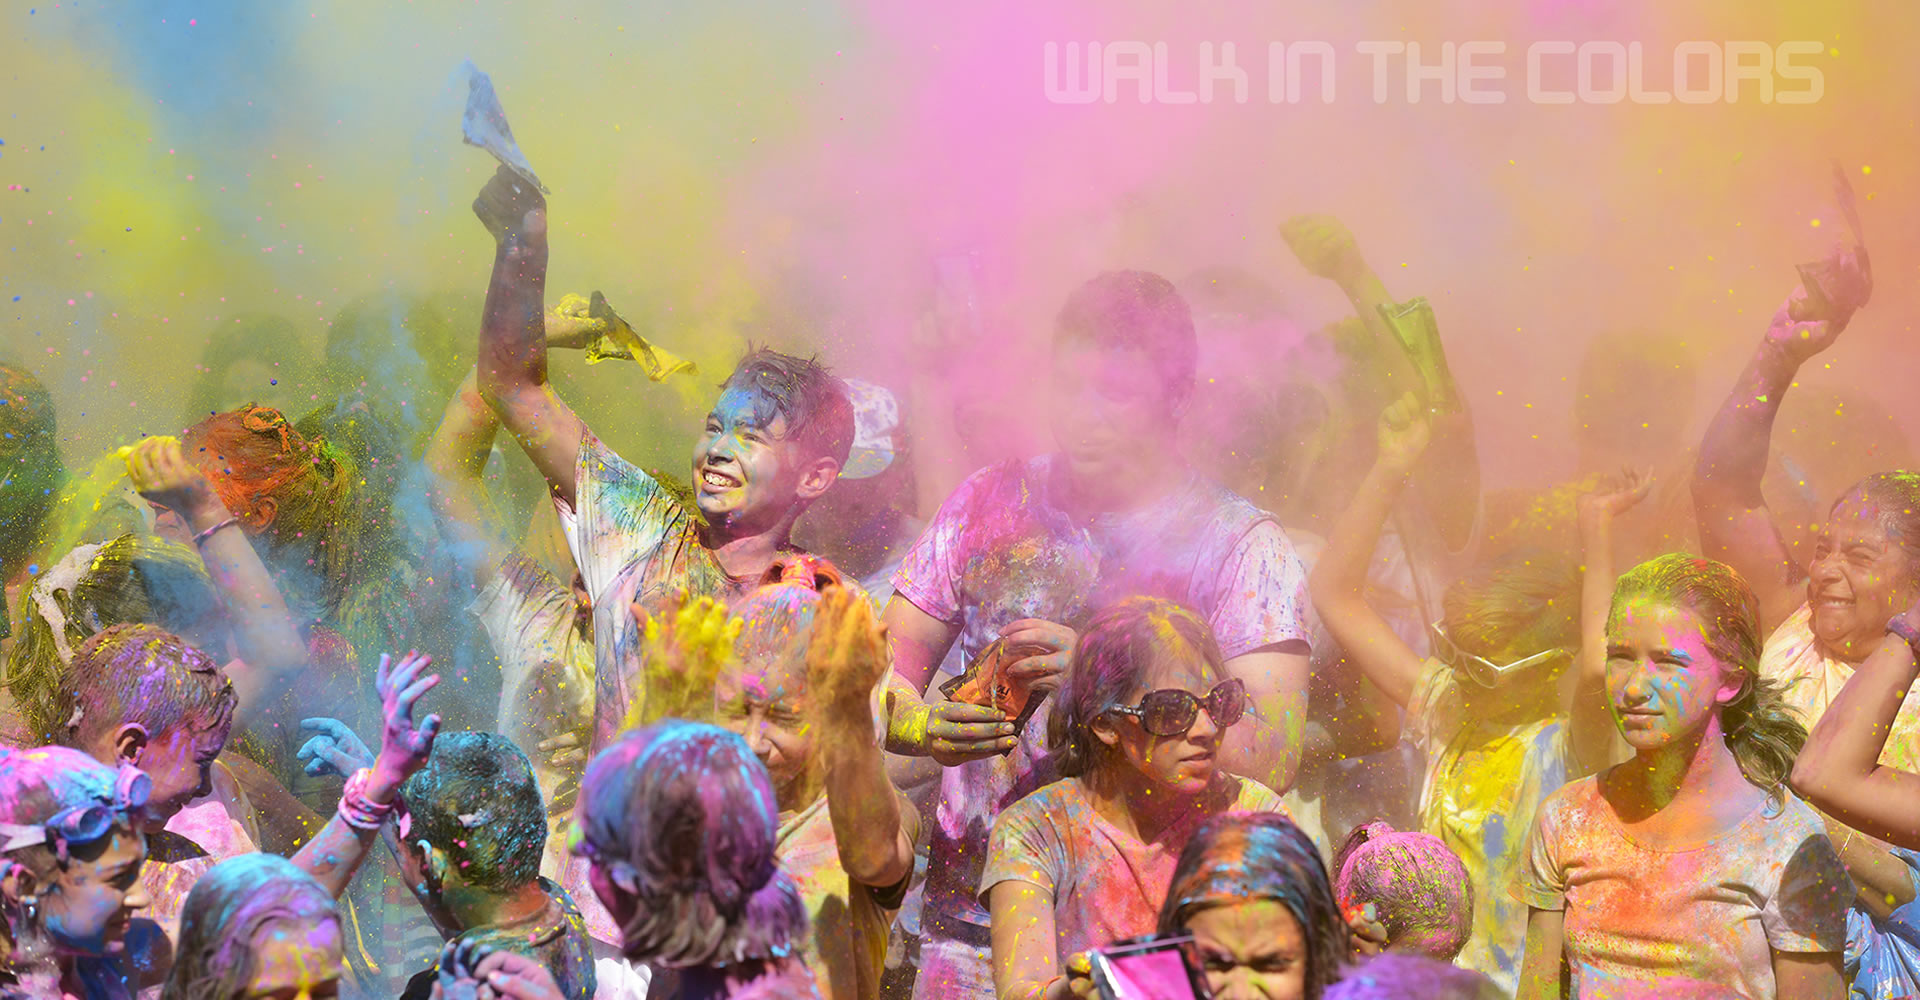 Walk in the colors